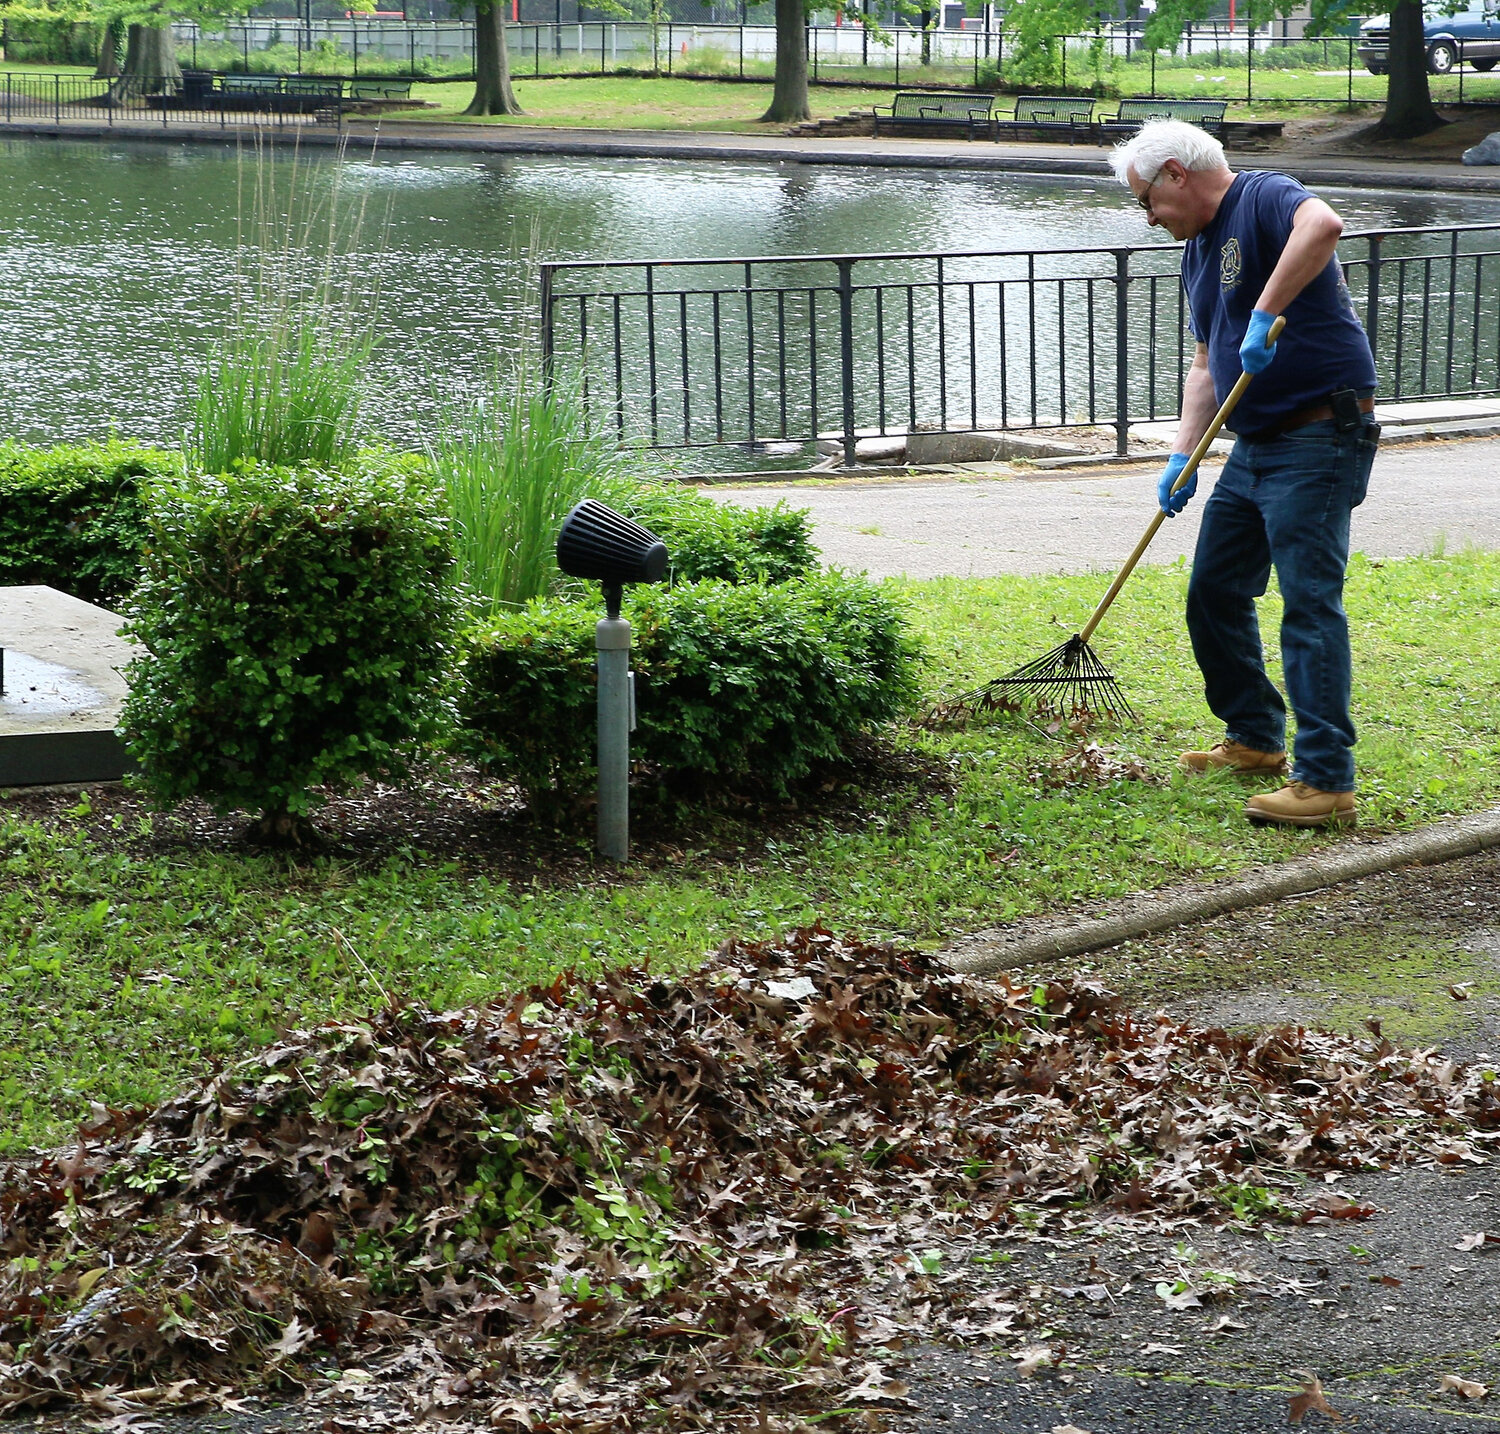 Bob Shelly helps rake up and clean up some debris around the pond.